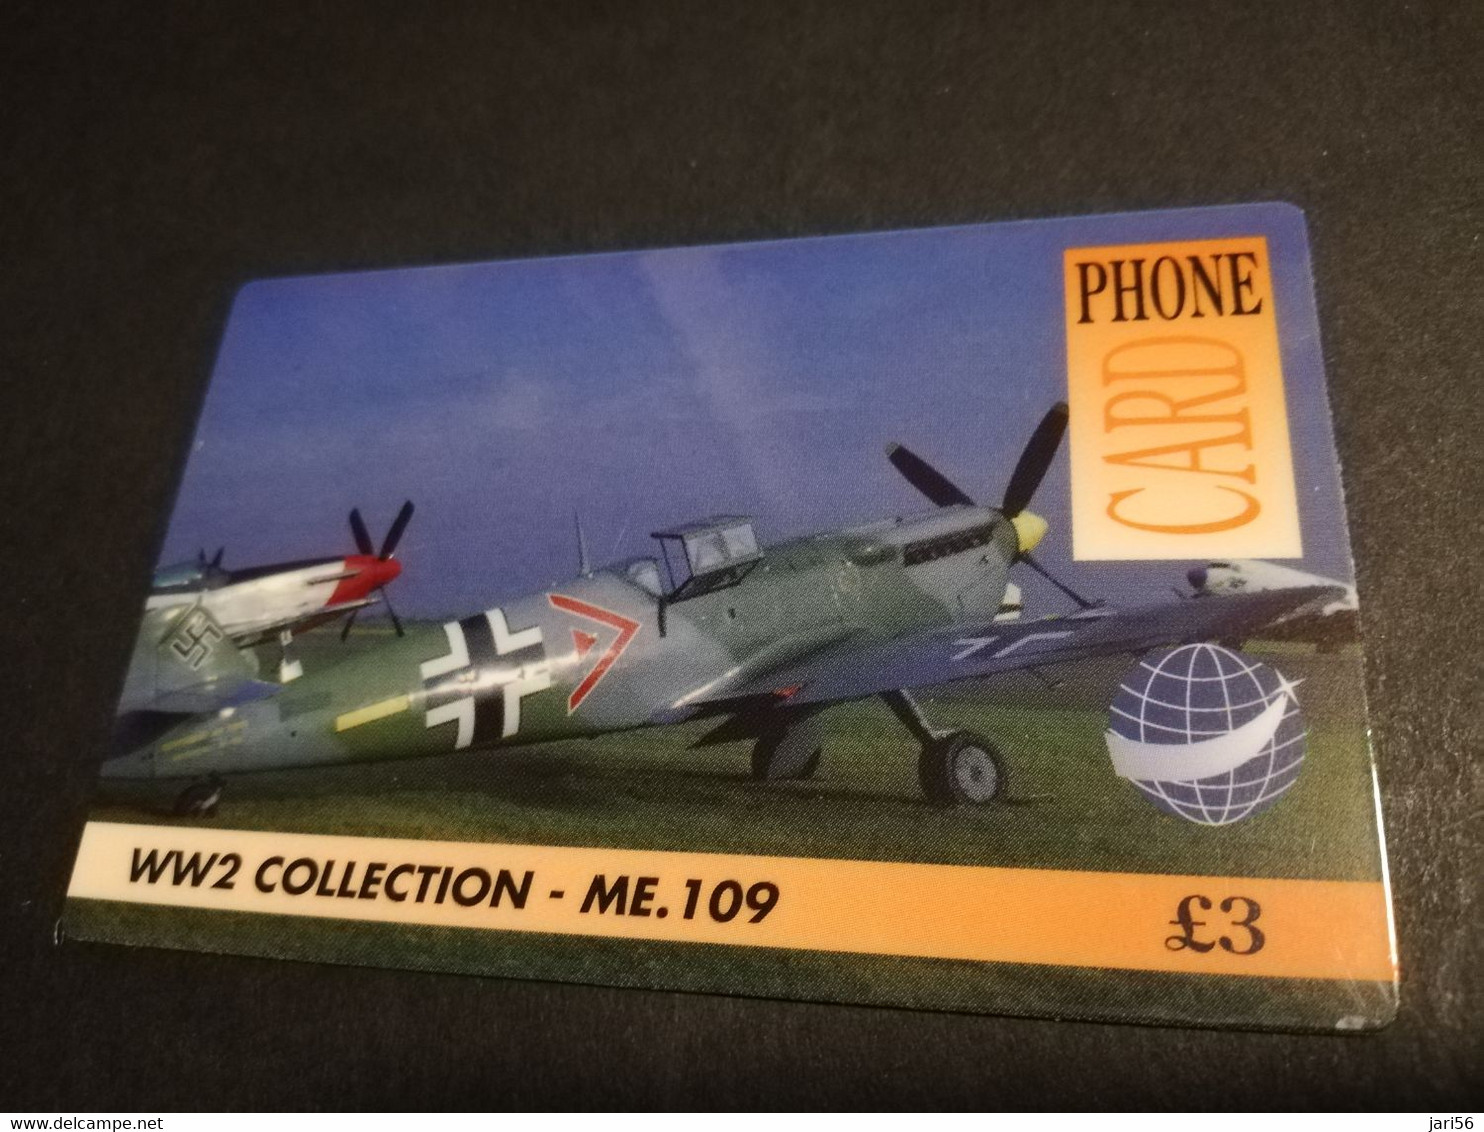 GREAT BRITAIN   3 POUND  AIR PLANES  ME-109   DIT PHONECARD    PREPAID CARD      **5916** - [10] Collections